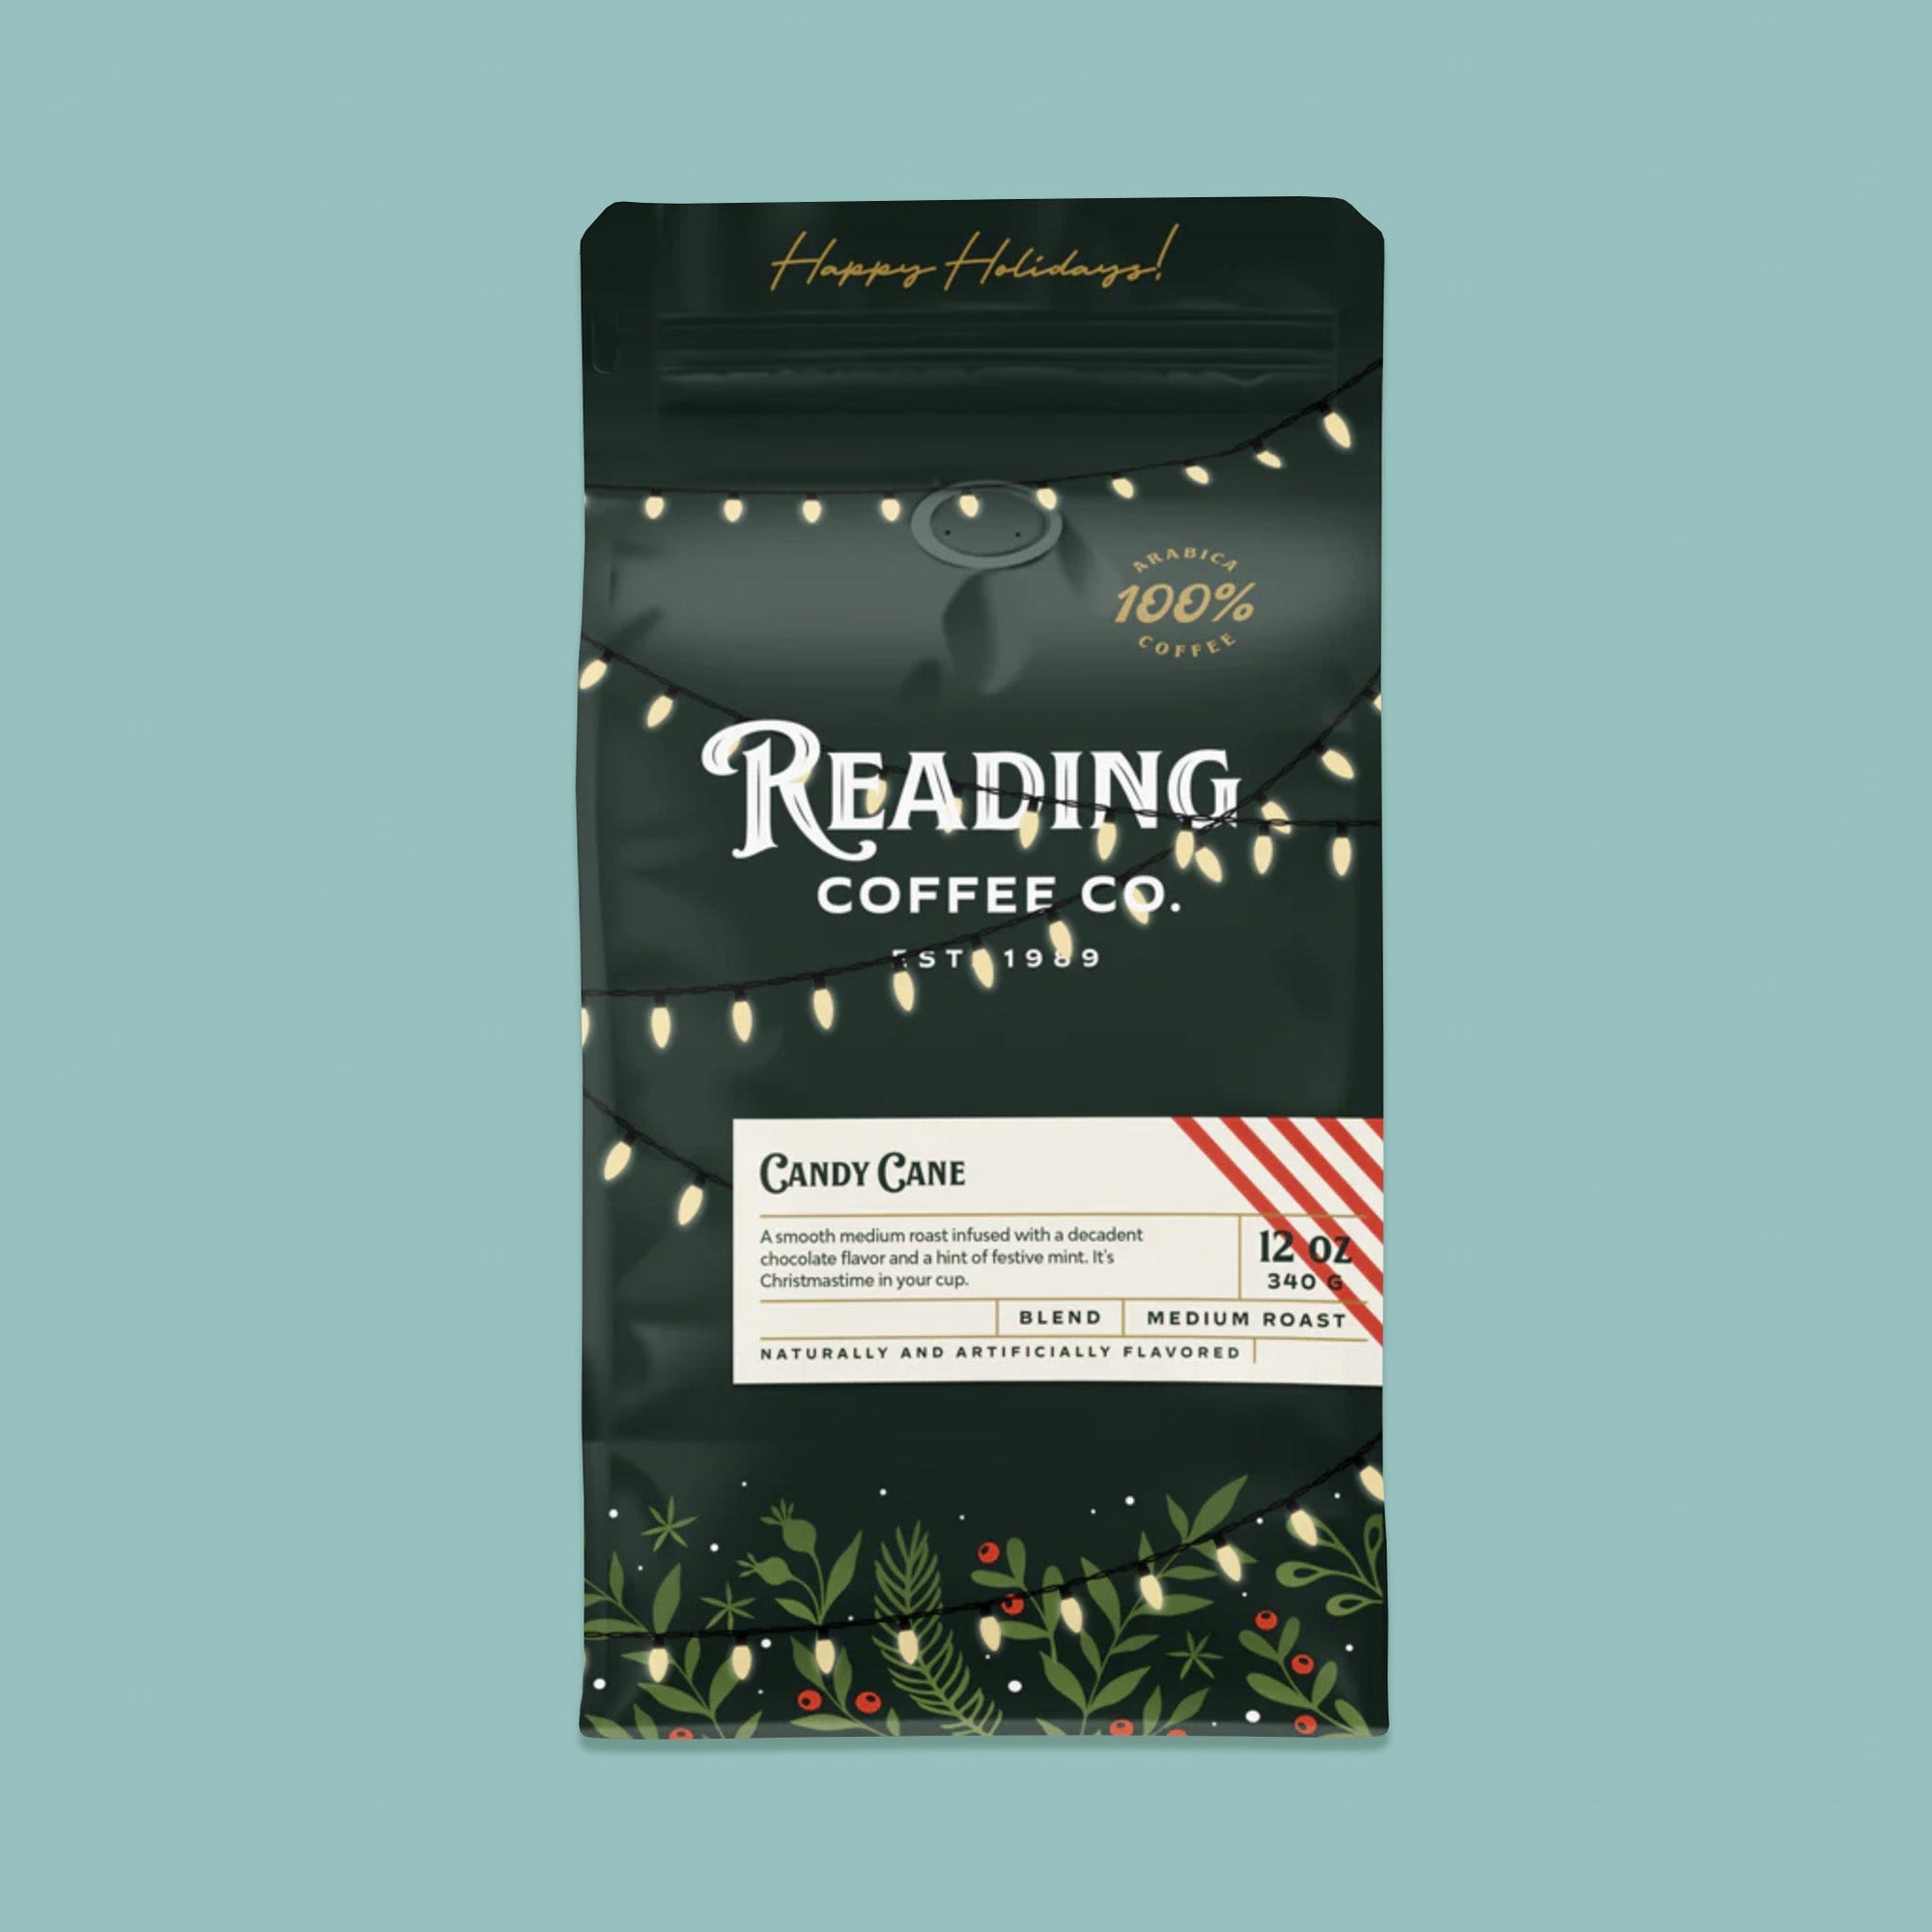 On a sage green background sits a dark green package of coffee. This package is gold, white, and dark green lettering. There are swags of lights and greenery with berries. It says "Happy Holidays!", "Reading Coffee Co. Est. 1989", "Candy Cane Coffee Blend Medium Roast." It is '100% Arabica Coffee. It also says "A smooth medium roast infused with a decadent chocolate flavor and a hint of festive mint. It's Christmastime in your cup." 12 oz 340g